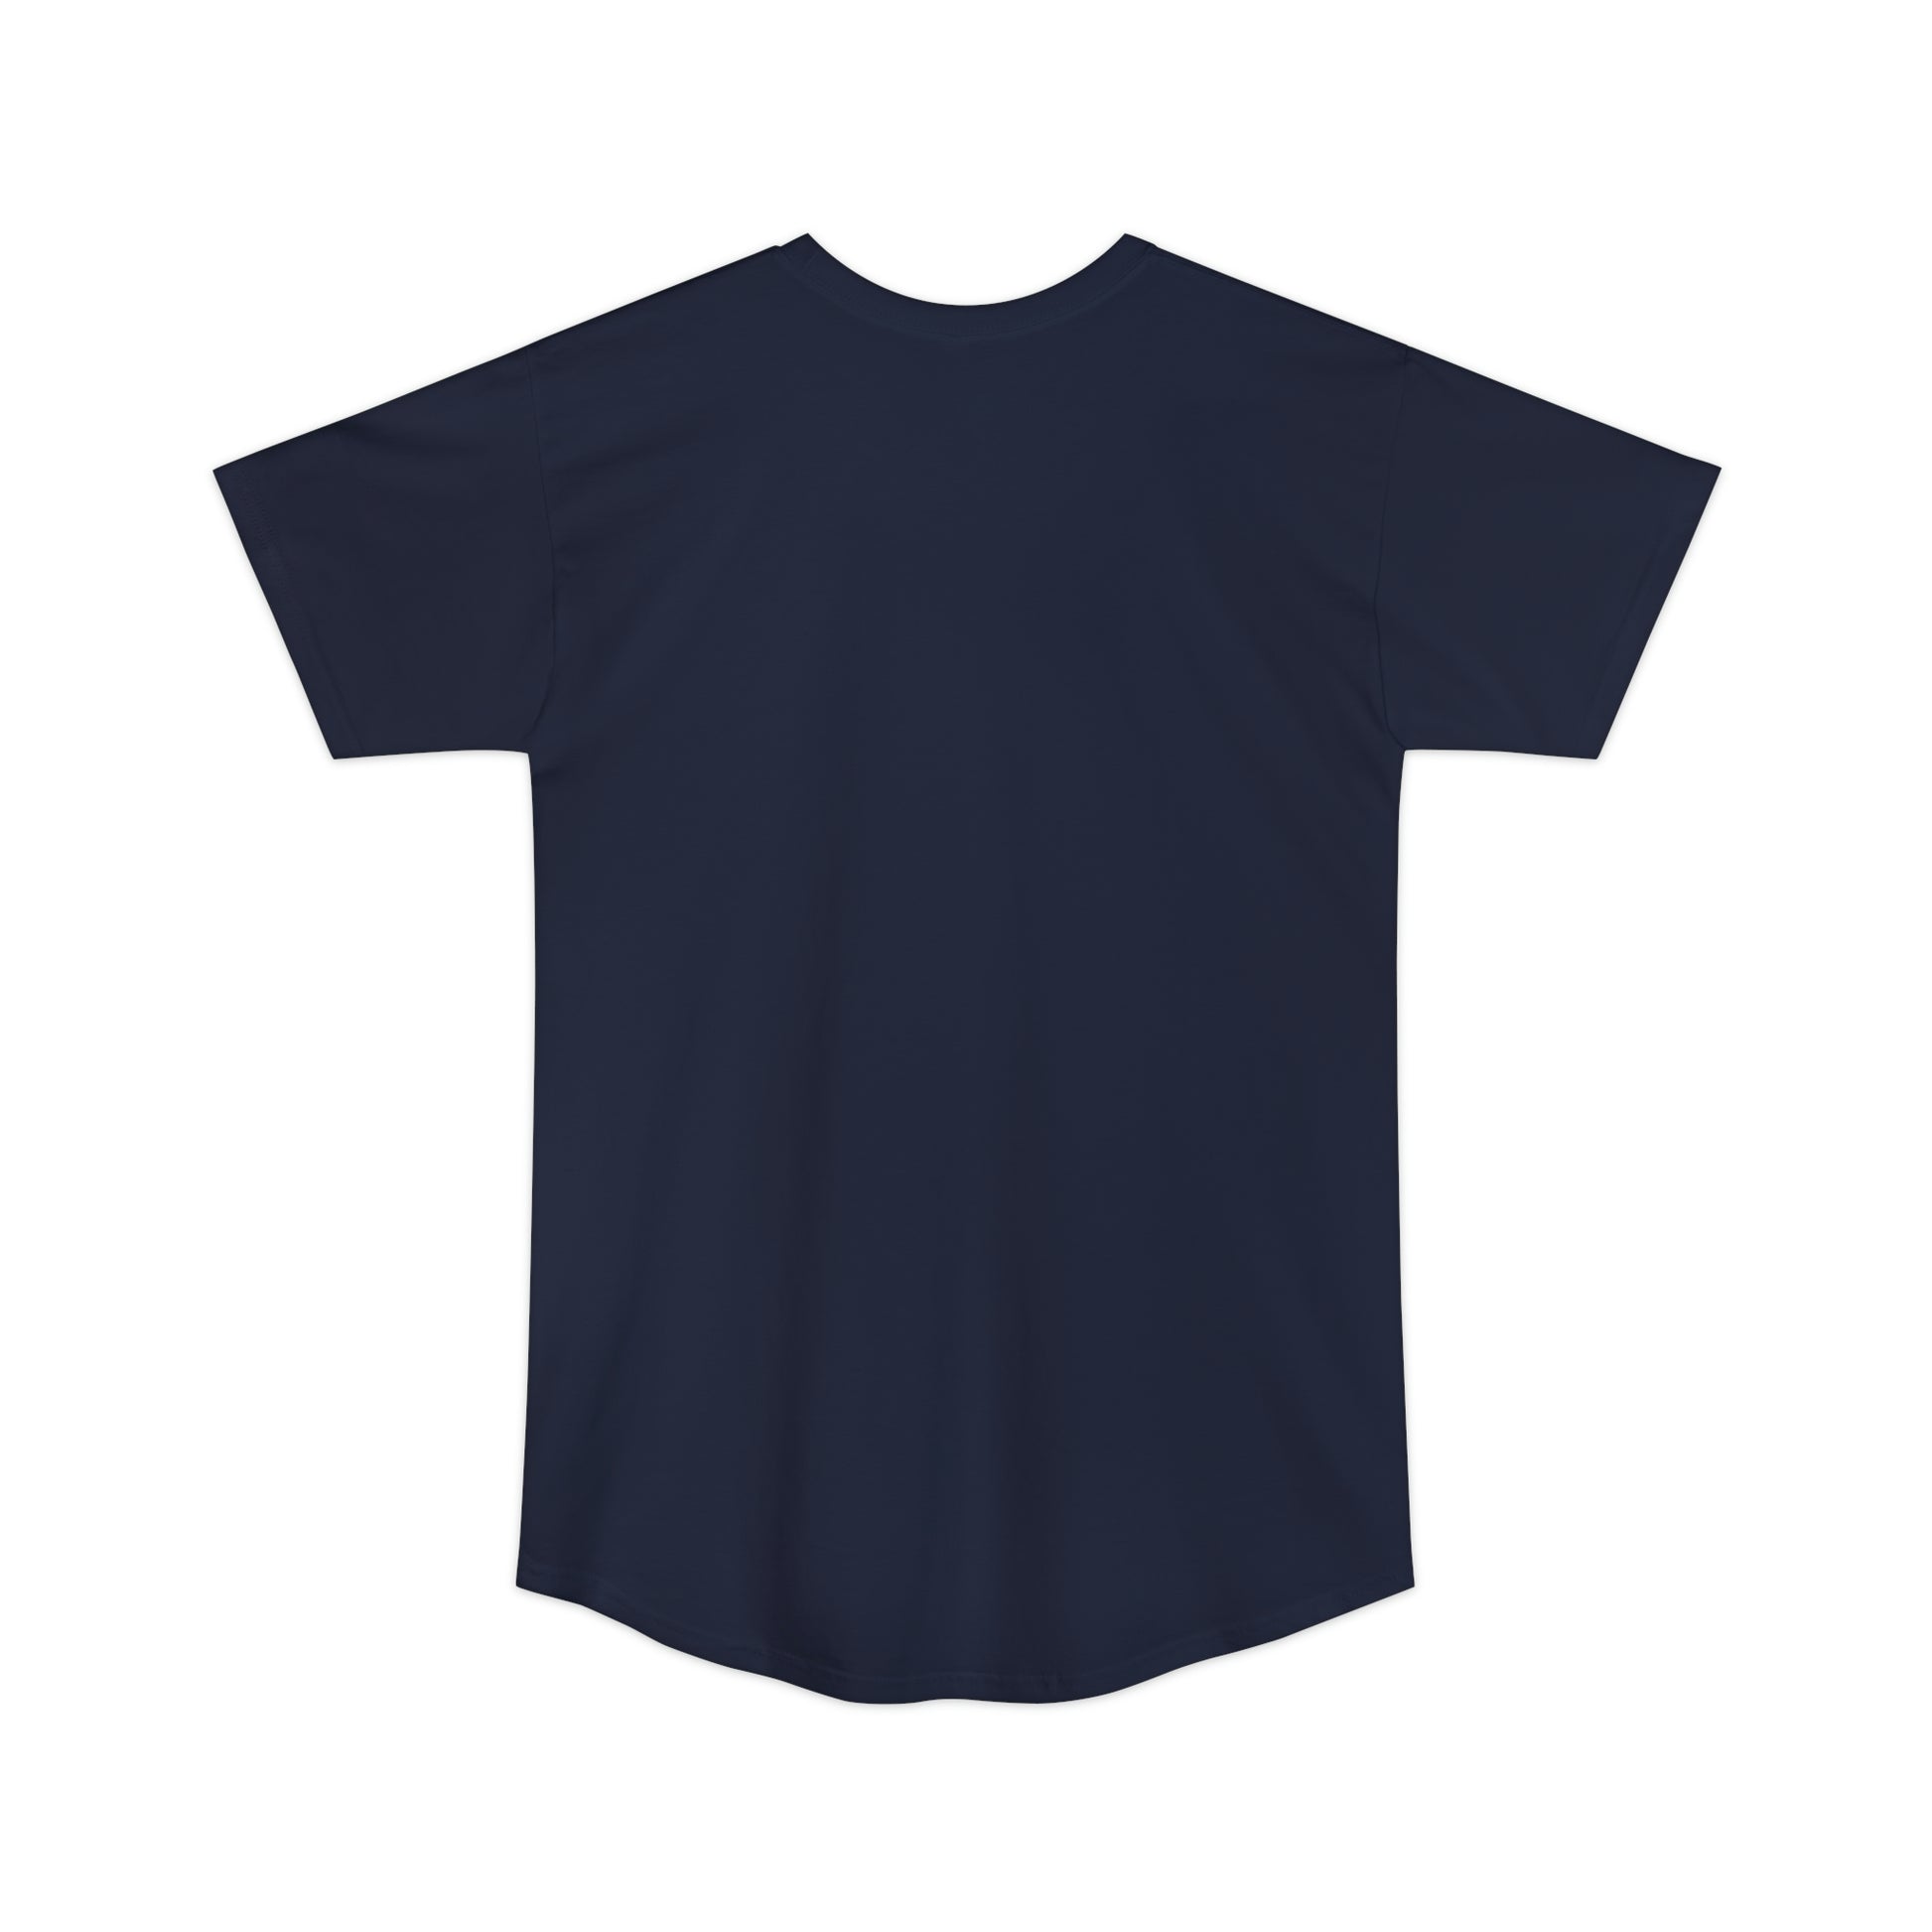 Flat back view of the Navy Blue t-shirt